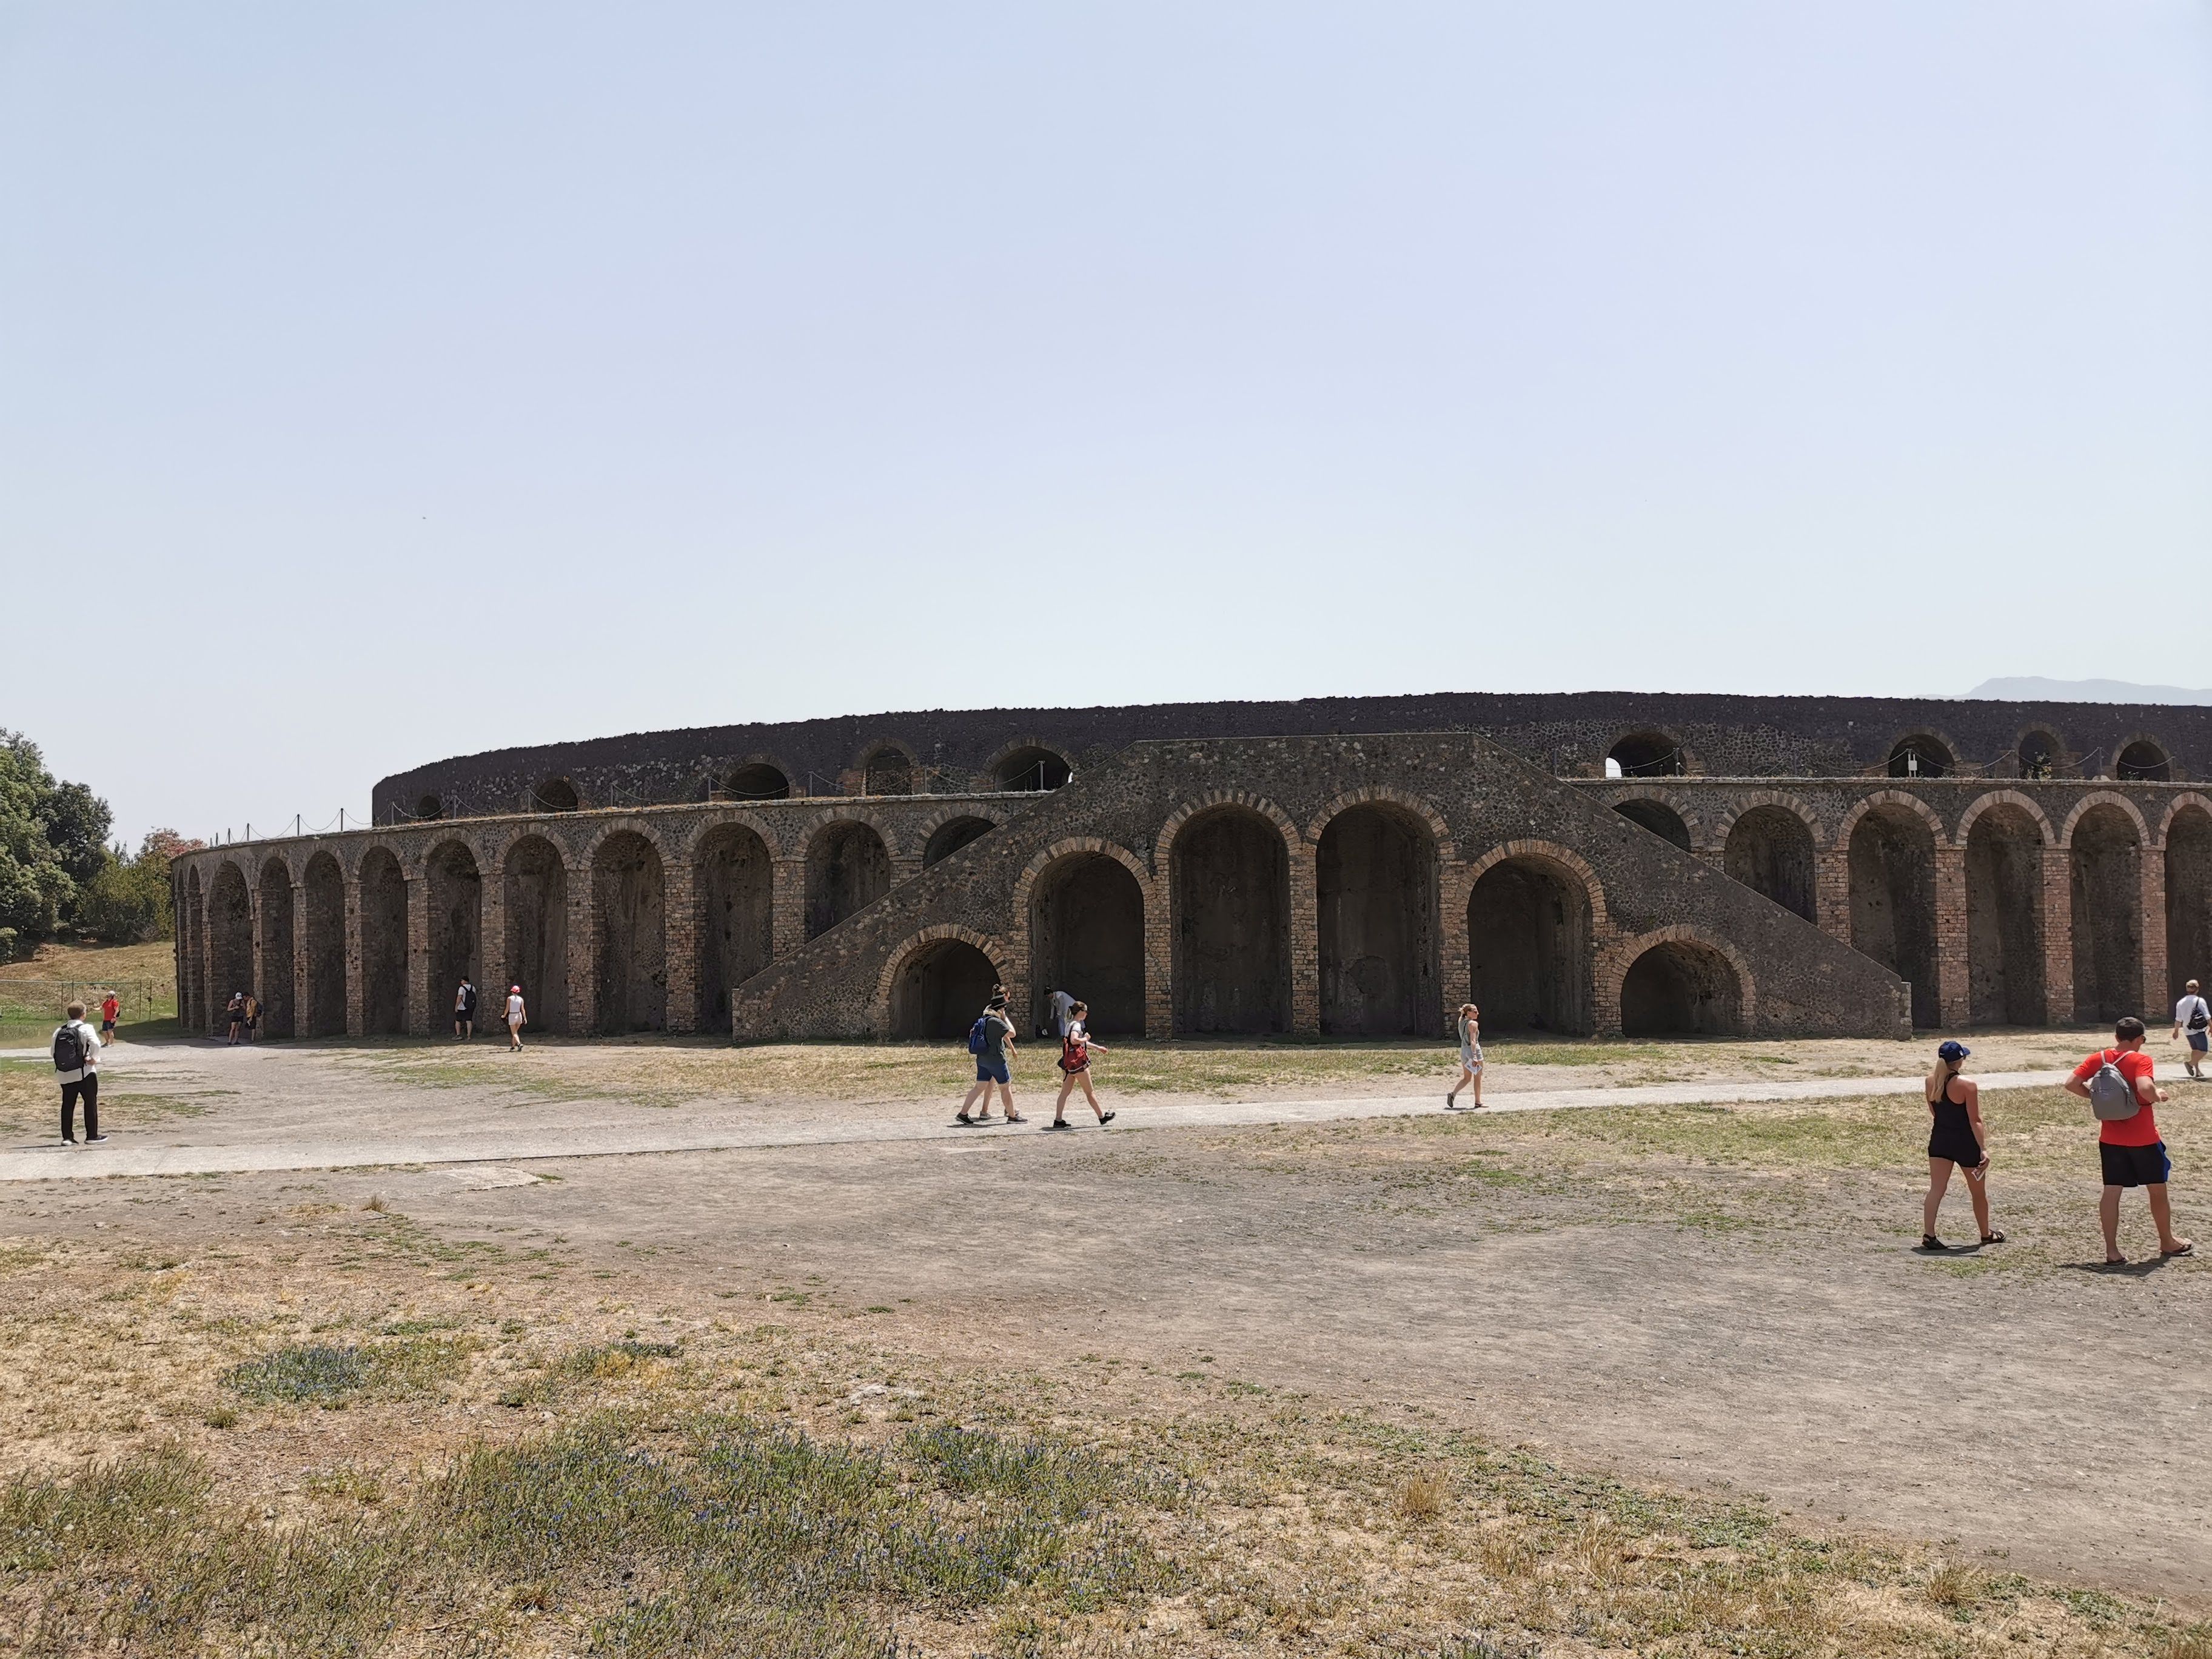 Outside of the Amphitheater Of Pompeii